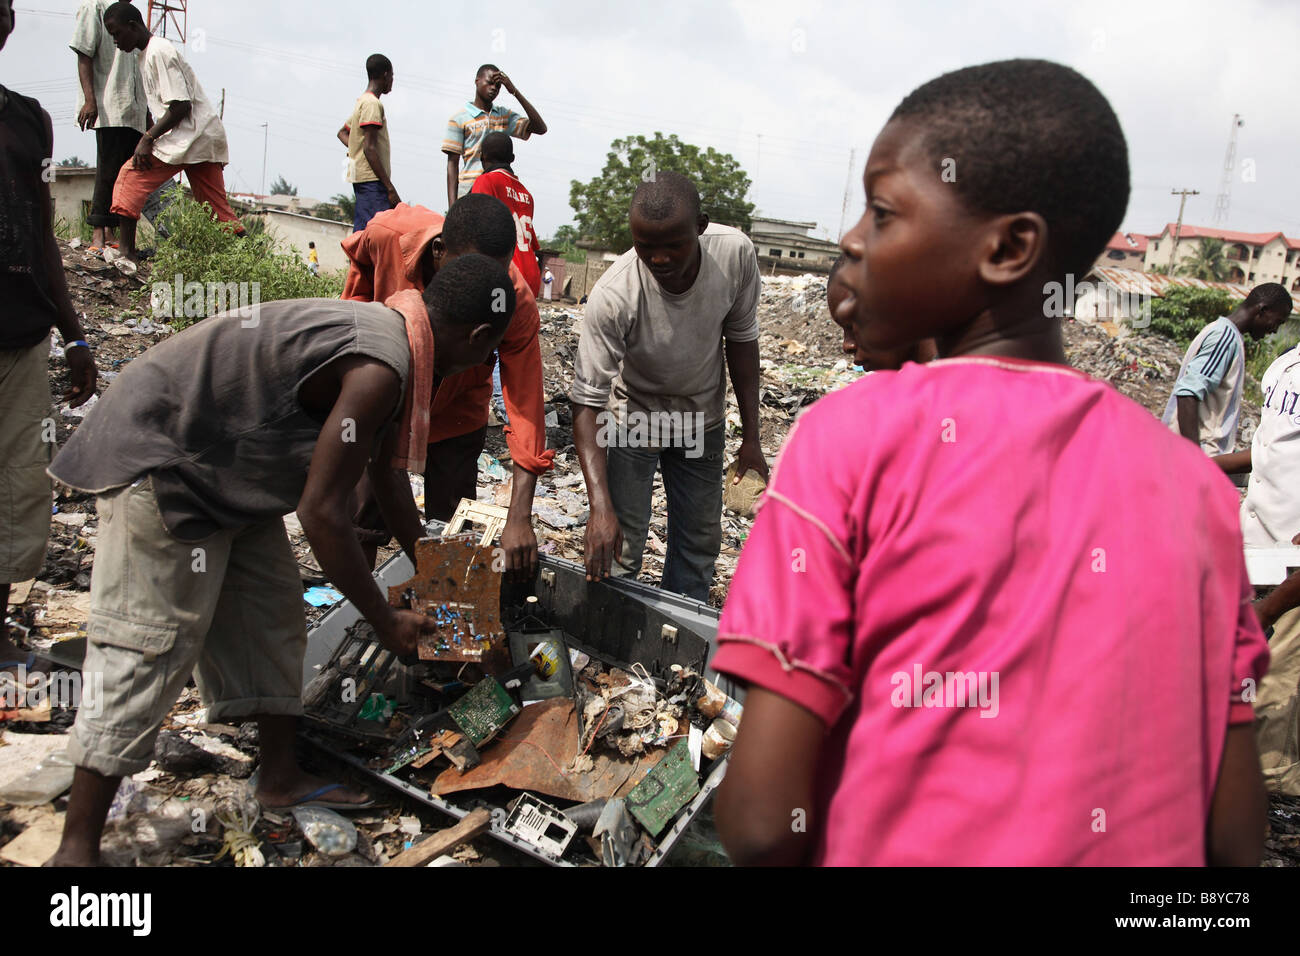 Electronic waste in Nigeria. Tons of e-waste from Western countries end up in West Africa, including Nigeria. Stock Photo